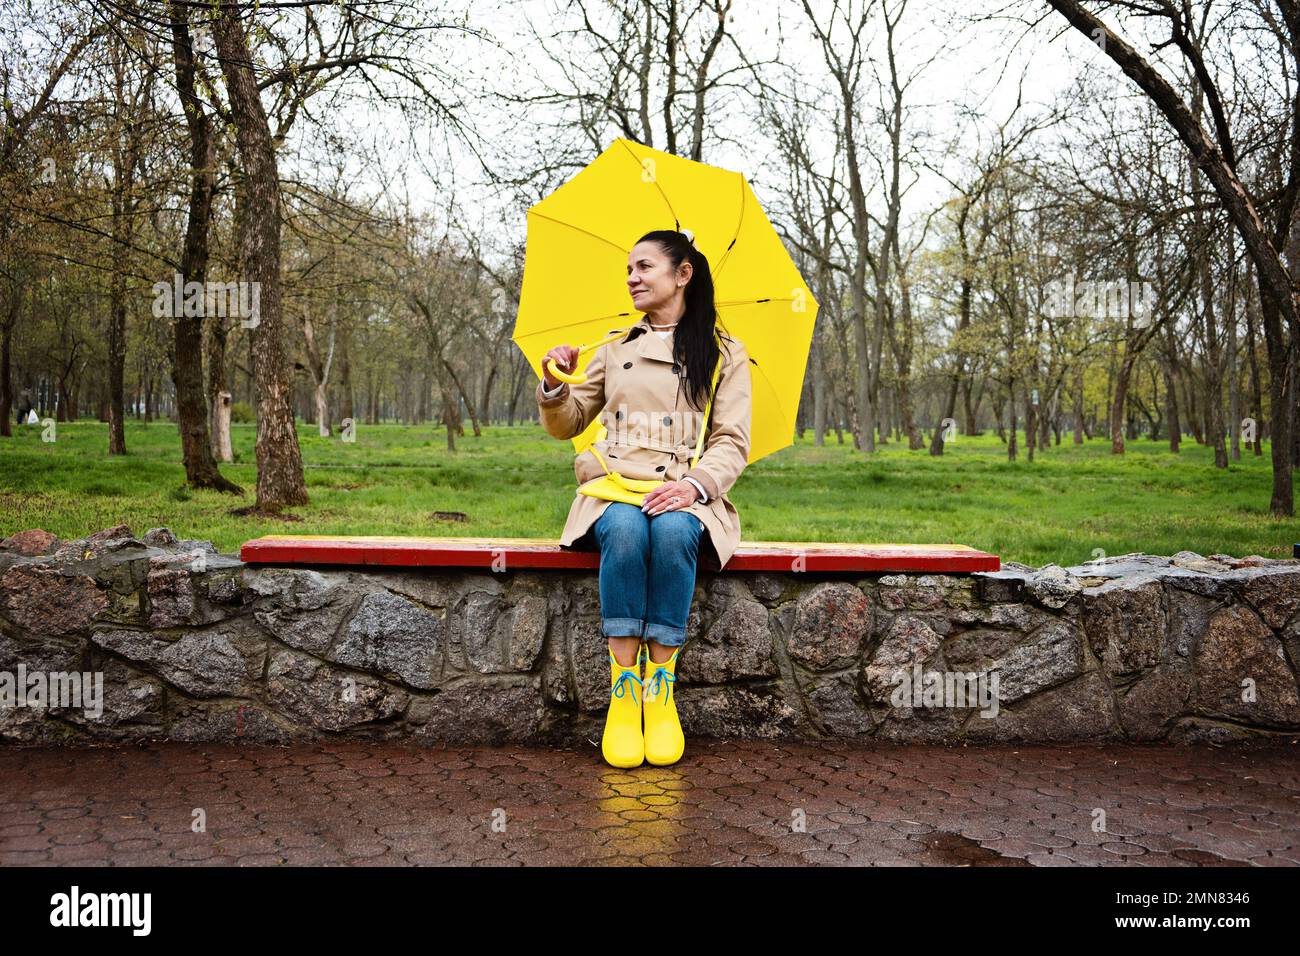 Coping with stress and anxiety. Practicing mindfulness and relaxation techniques. Happy senior woman in yellow rain coat with yellow umbrella walking Stock Photo